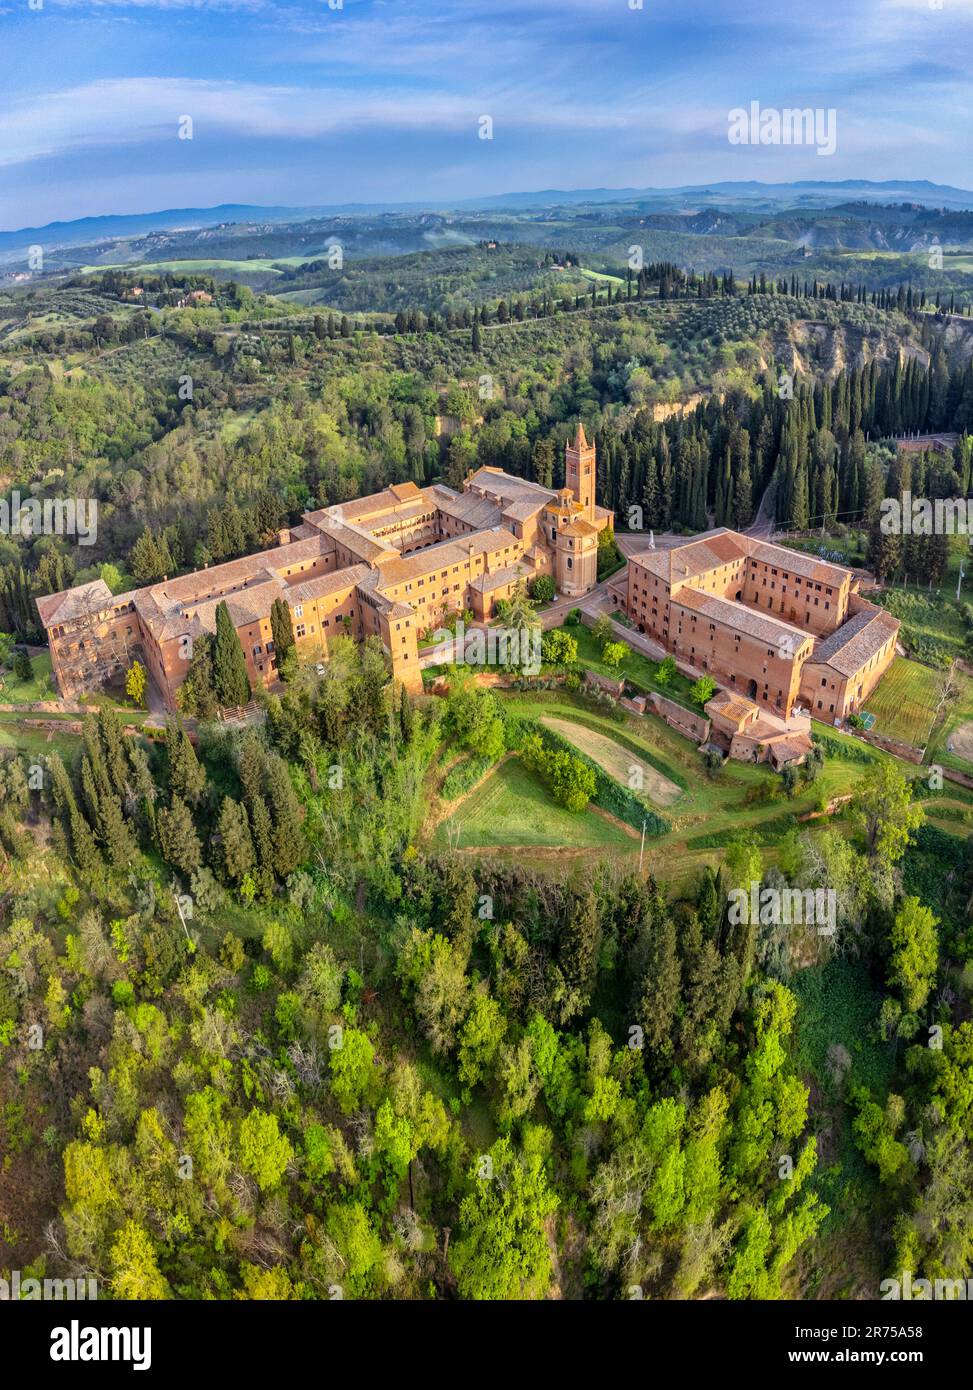 Aerial view of the abbey of Monte Oliveto Maggiore, Asciano, province of Siena, Tuscany, Italy Stock Photo